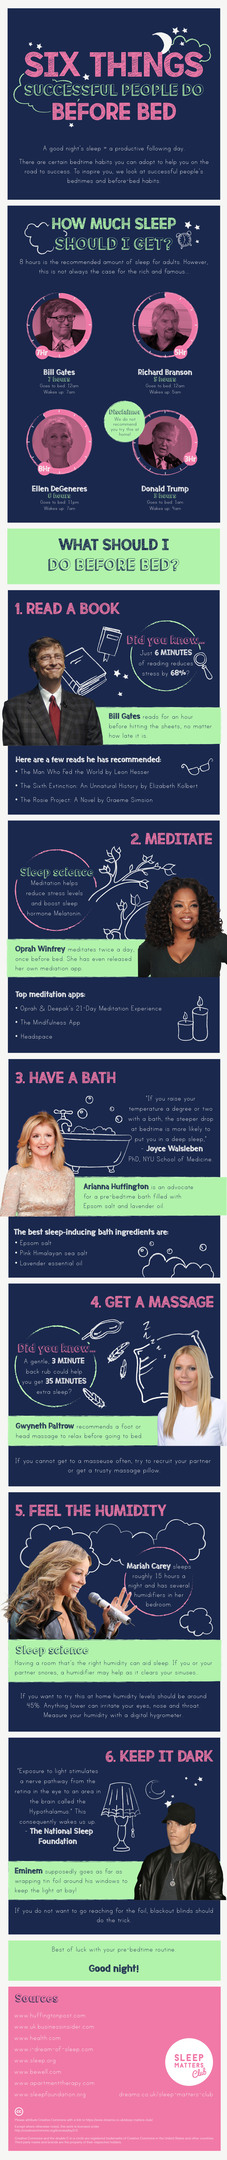 Successful People Before Bed infogram